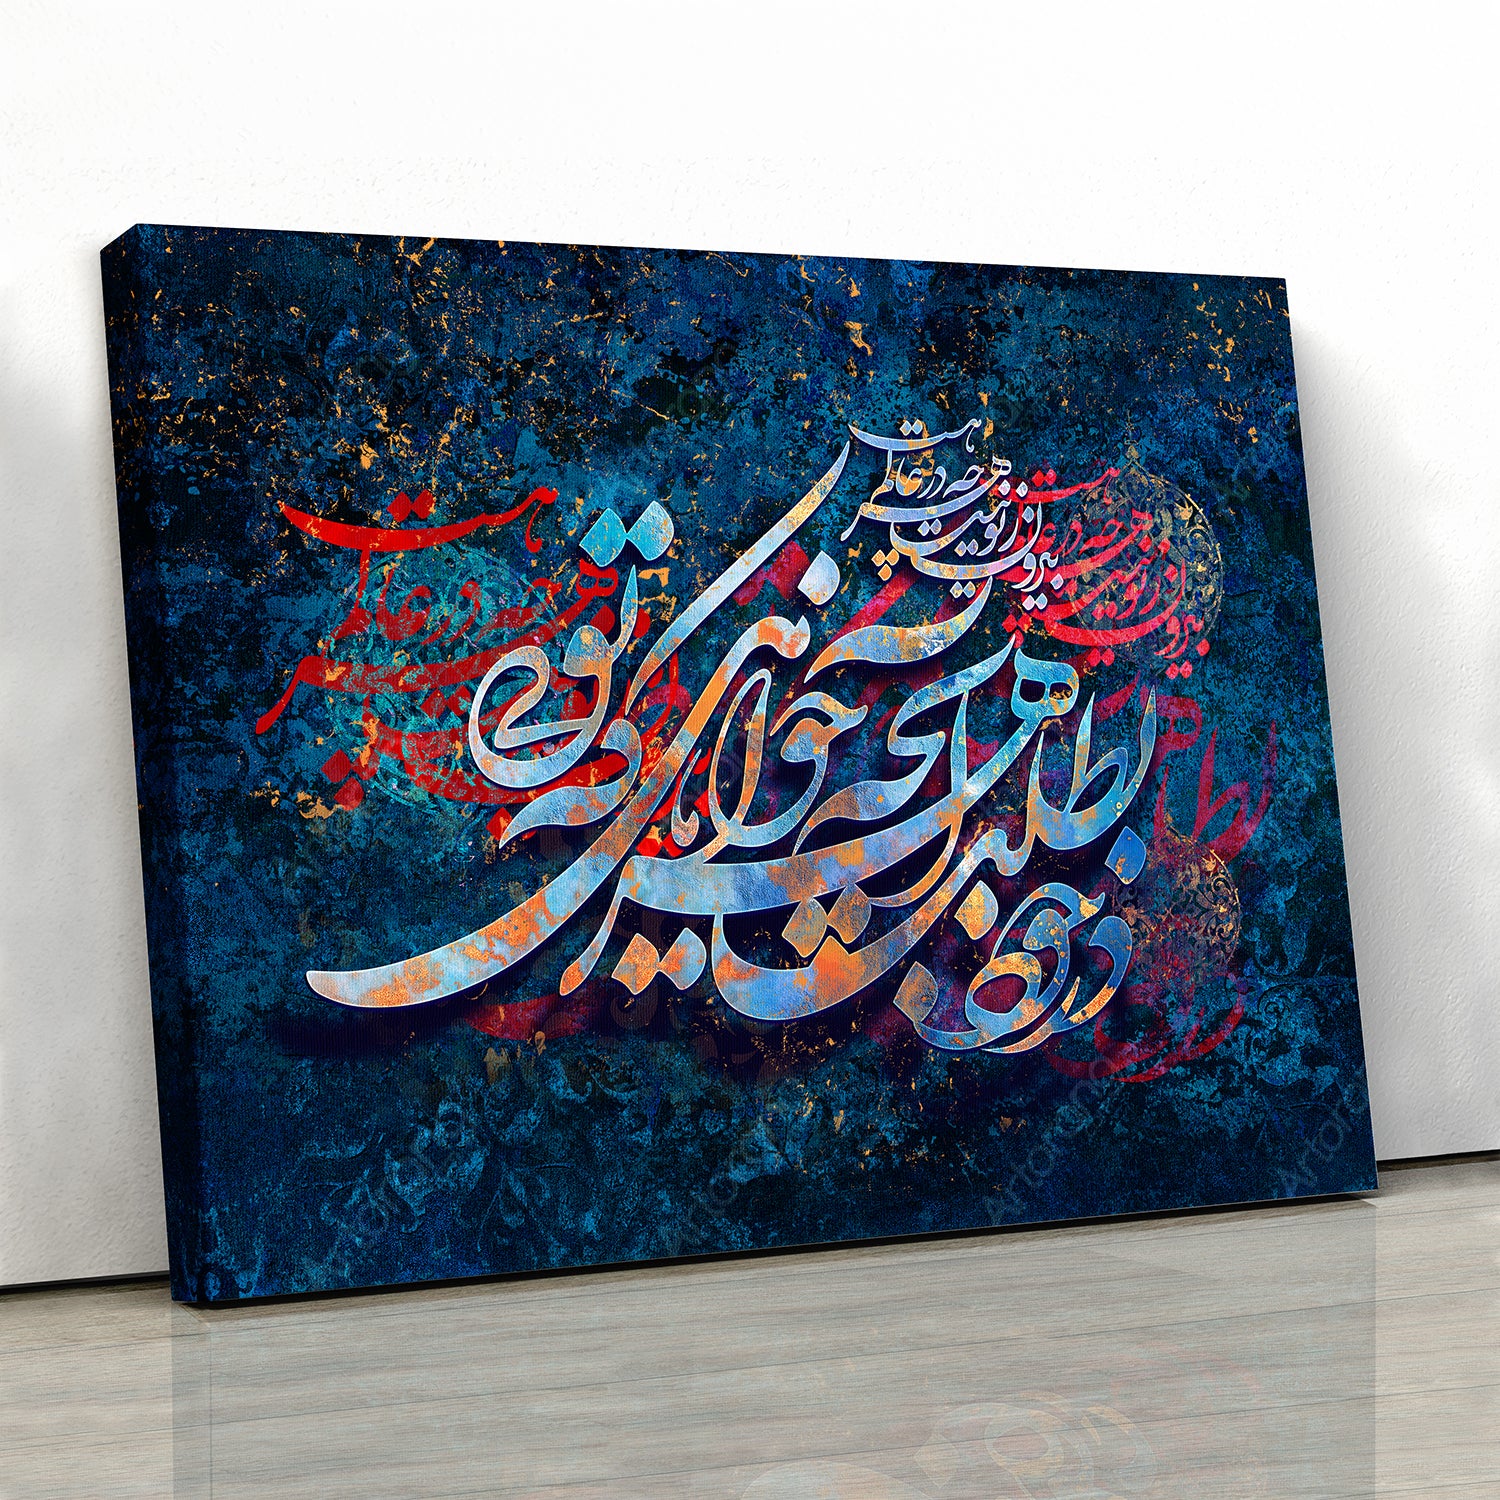 Universe is not outside of you, Rumi quote with Persian calligraphy wall art canvas print